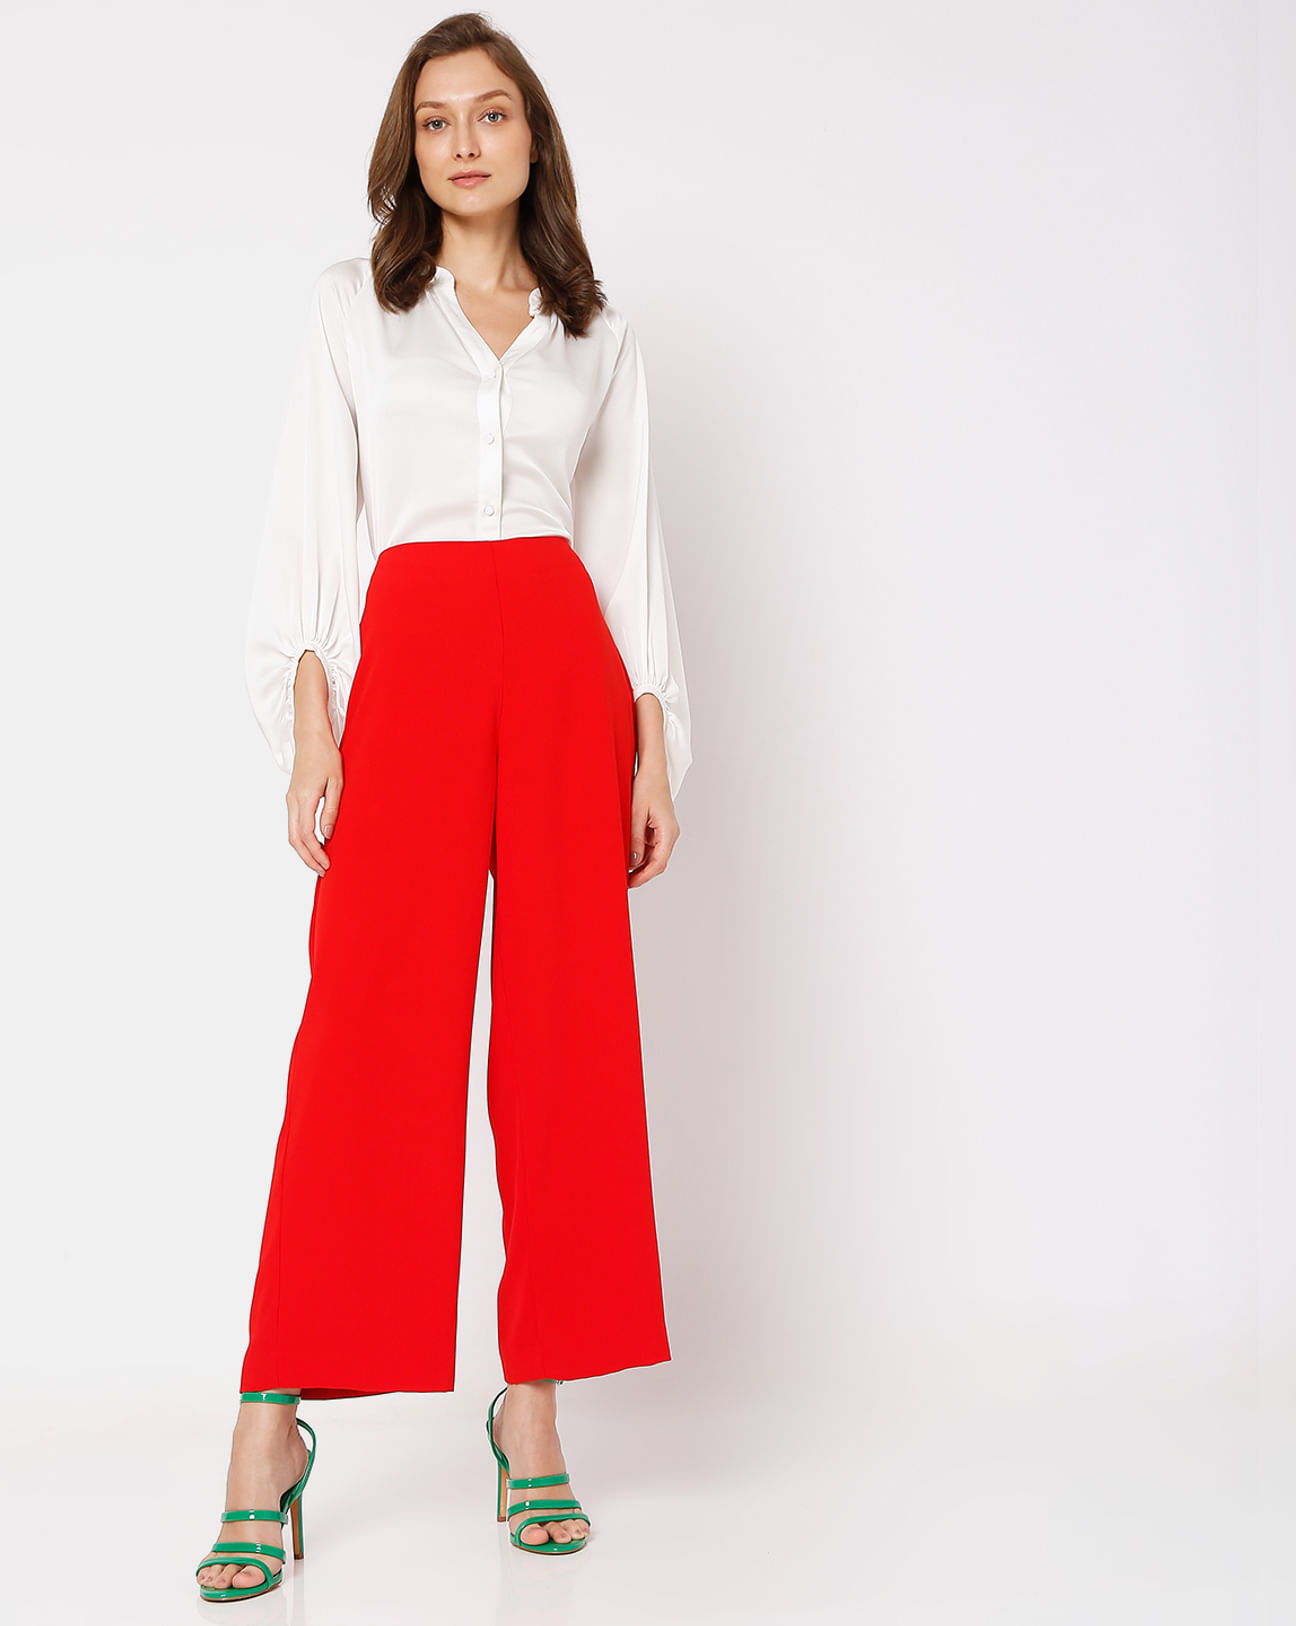 Never Fully Dressed striped trousers co-ord in pink and red